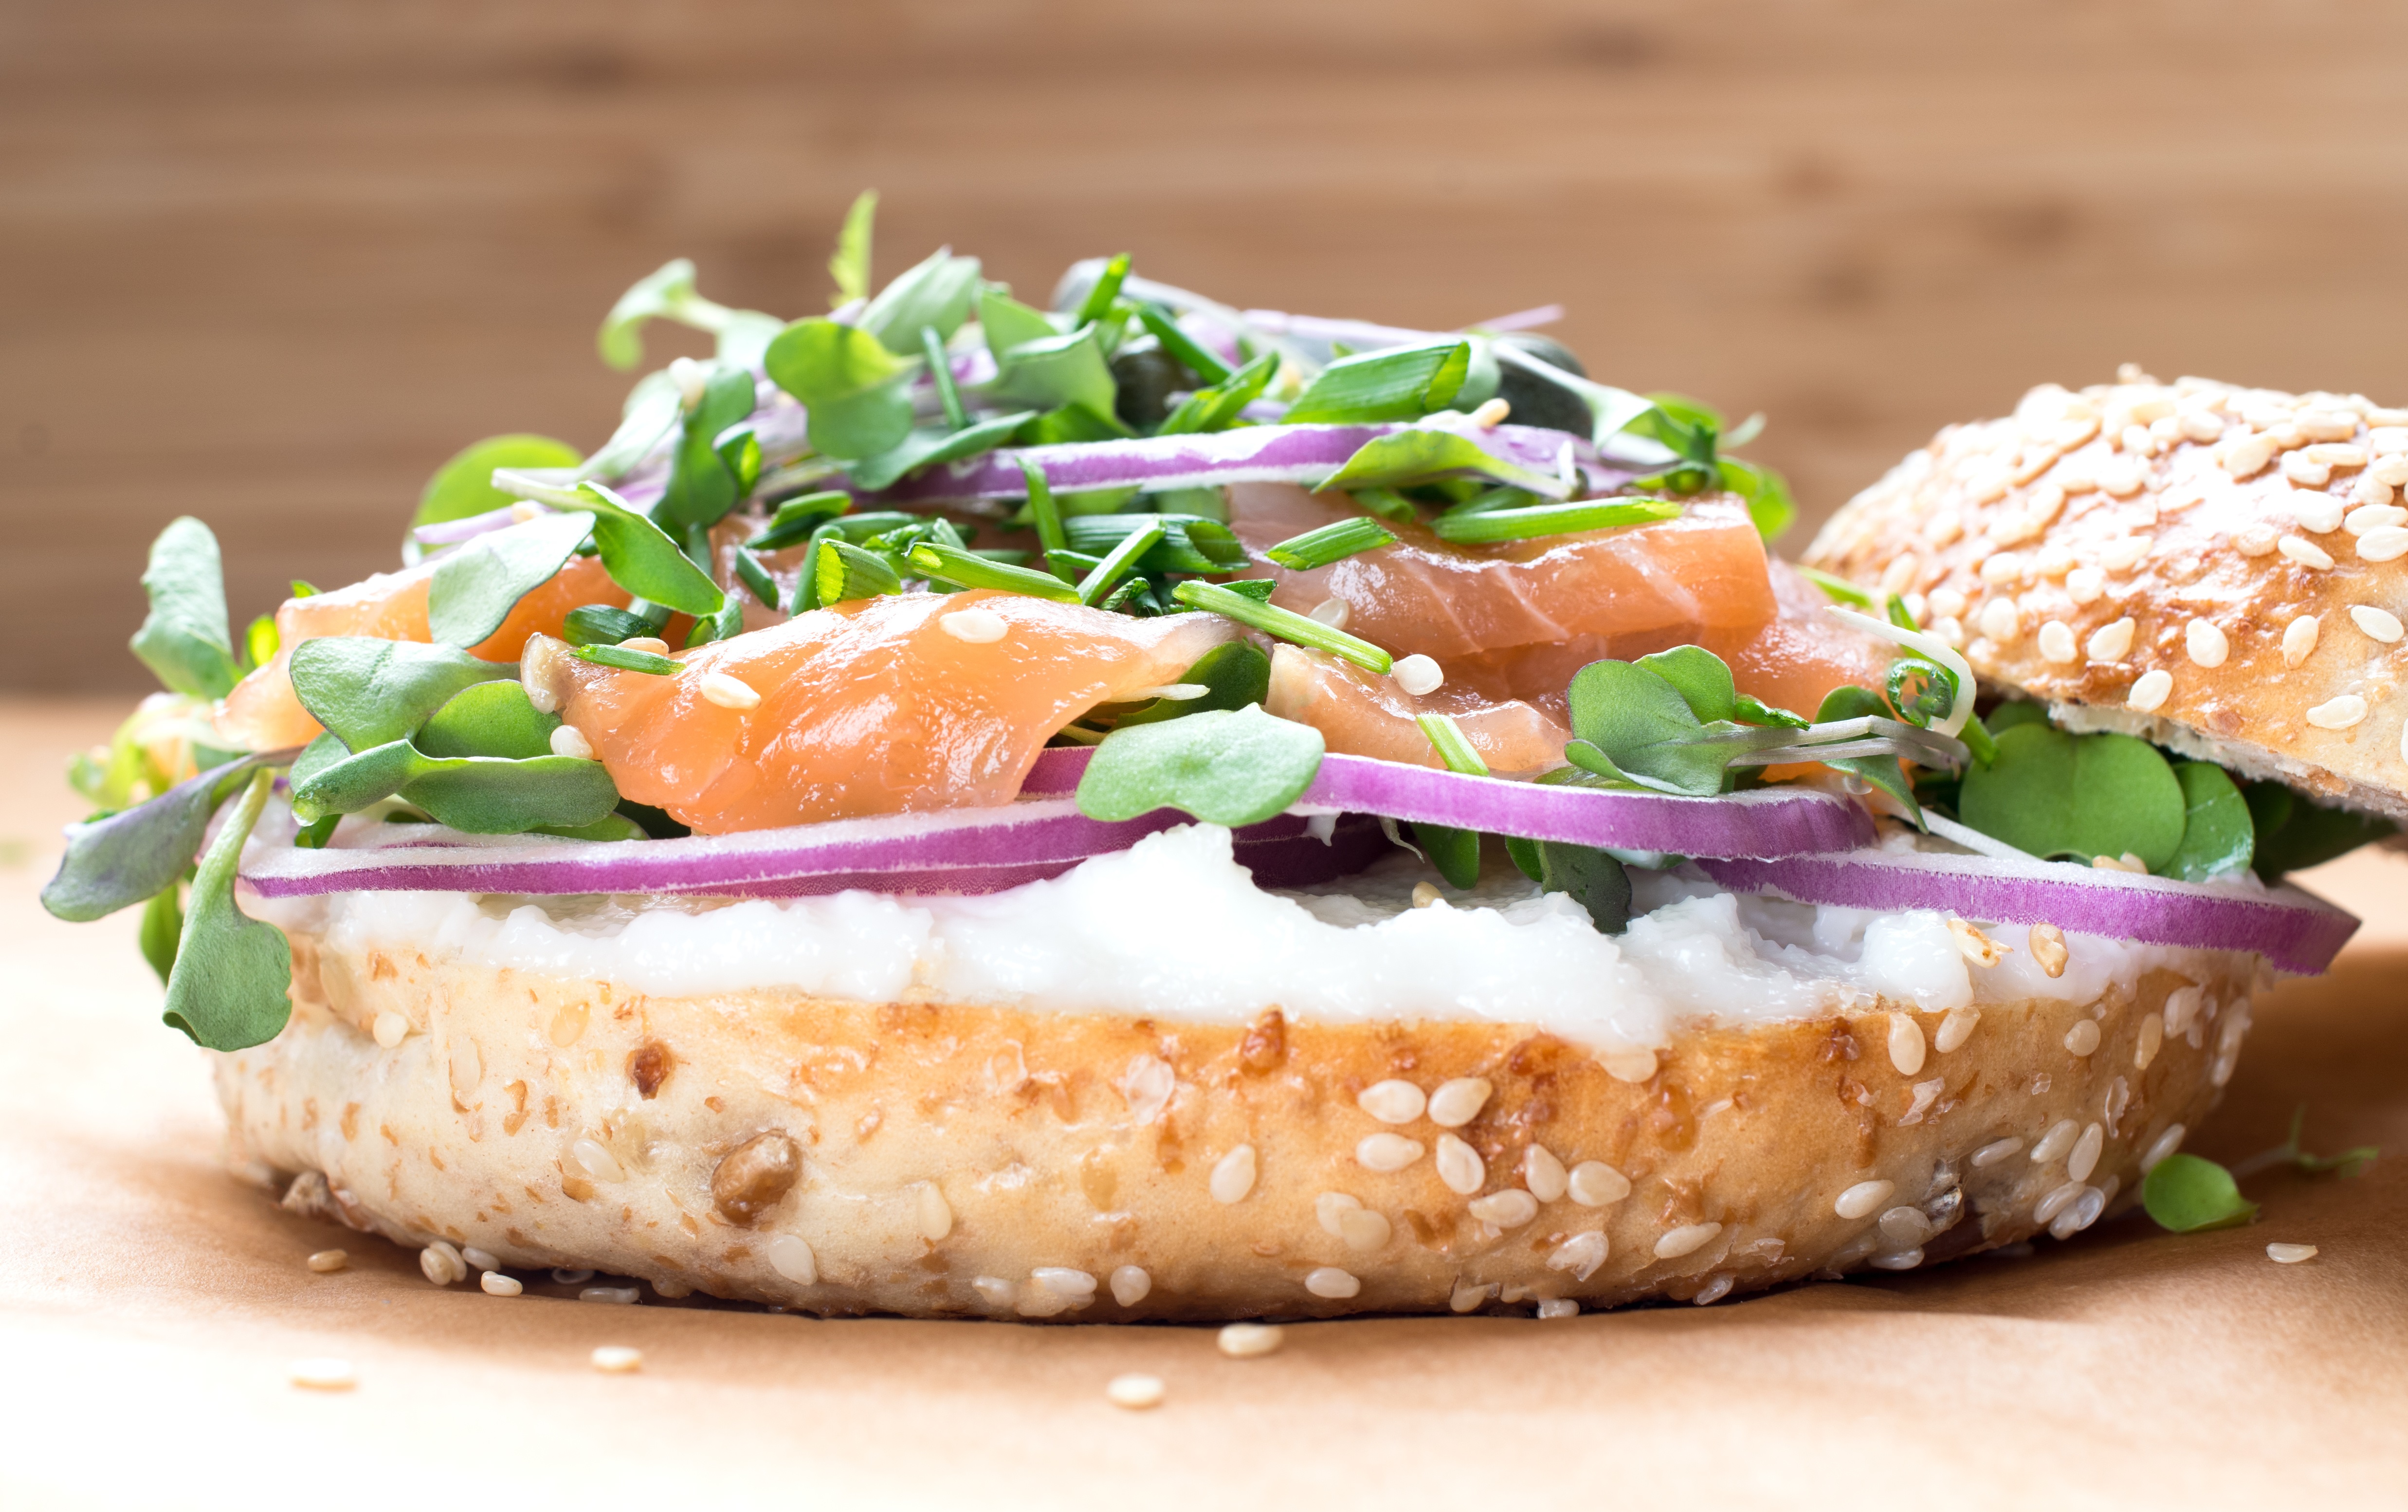 Bagel sandwich with creame cheese, salmon,onion,tomato,greens,chives close-up on a wooden background. Delicious bagel, golden bake color, soft inside, crispy outside.